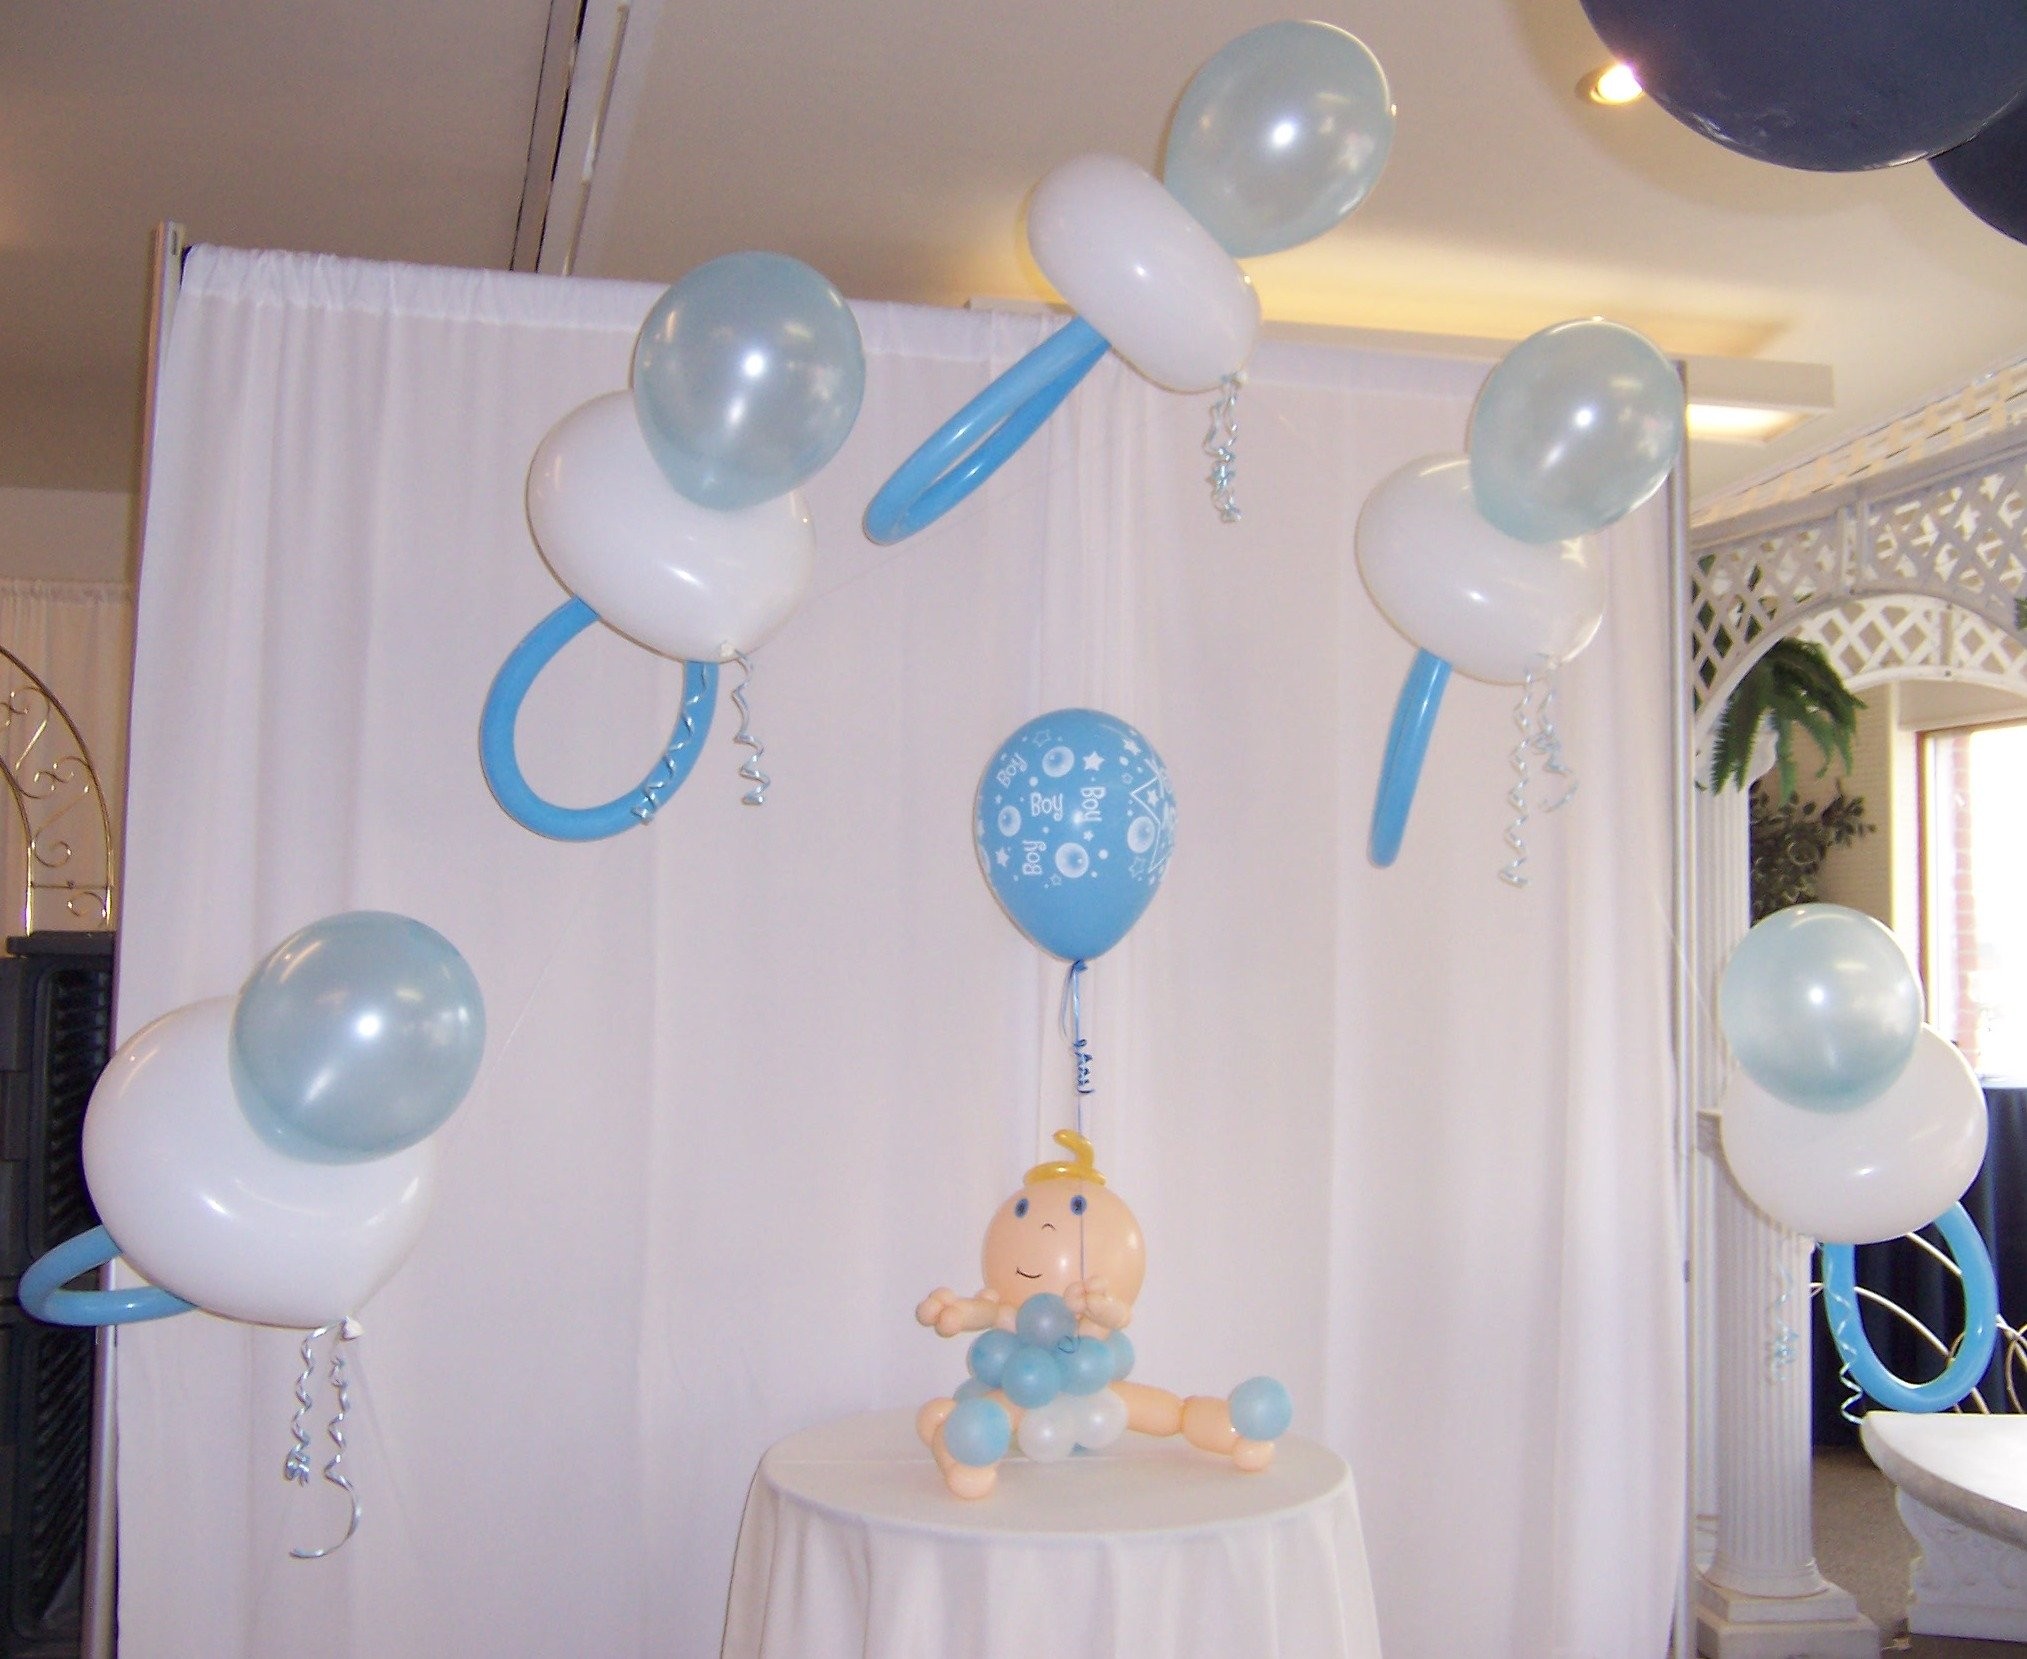 2027x1659 Baby Shower Balloon Decorations Hd 1080P 12 HD Wallpapers